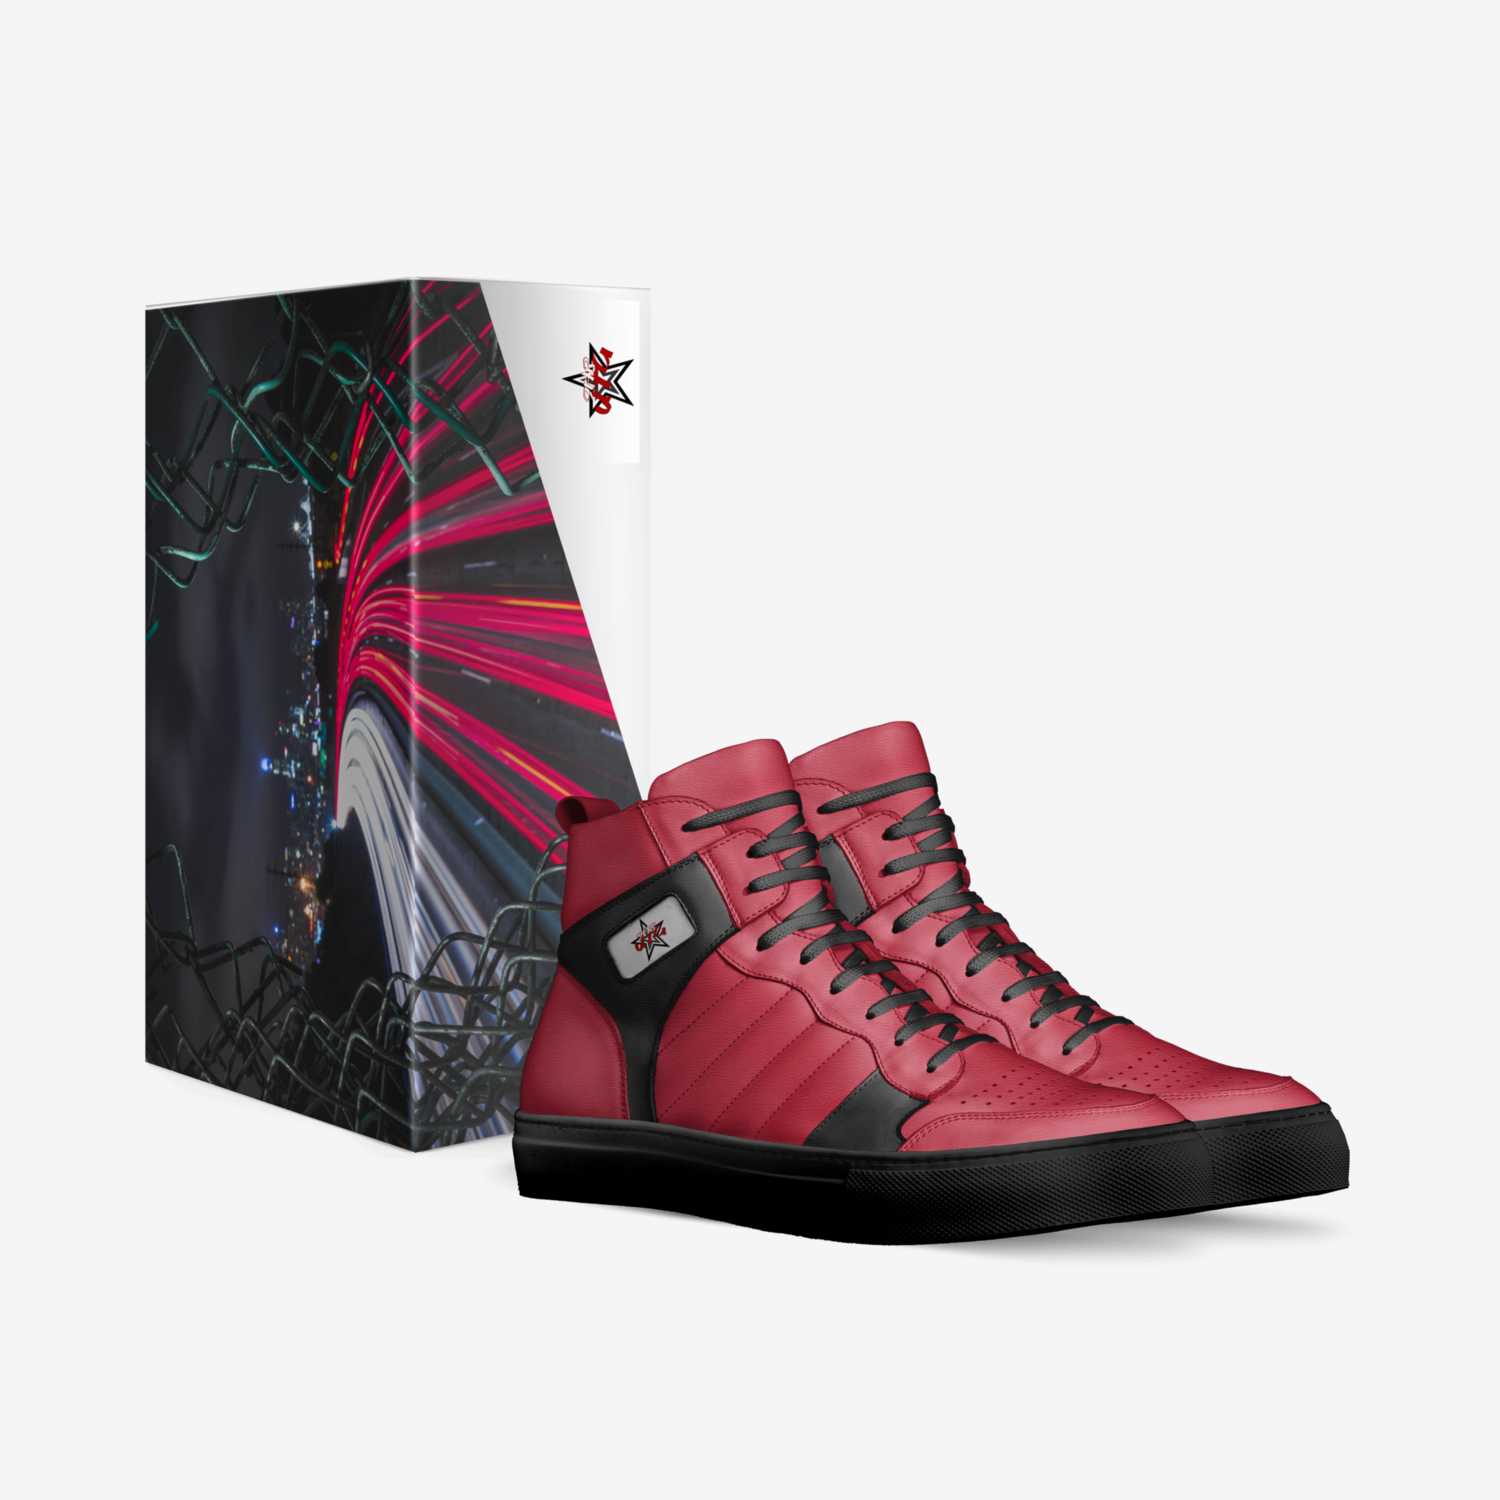 Greatness 3 custom made in Italy shoes by Star Utg | Box view